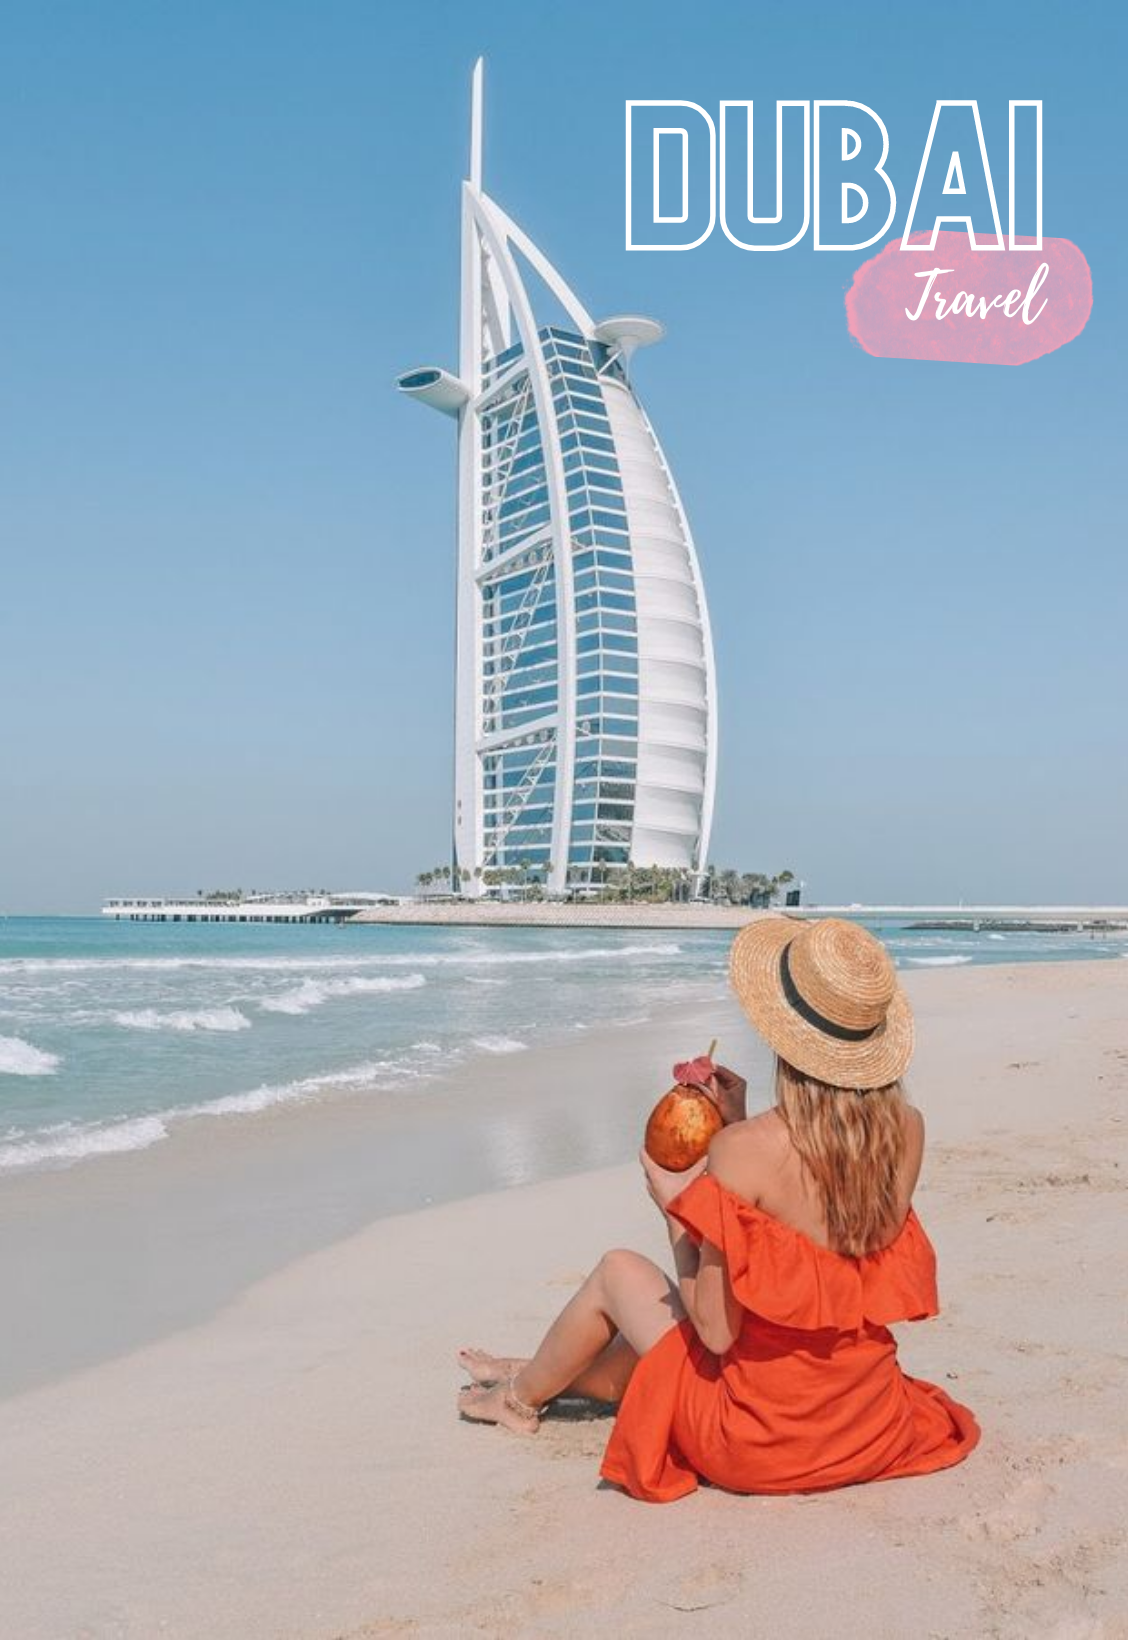 Top 6 places you can't miss in Dubai